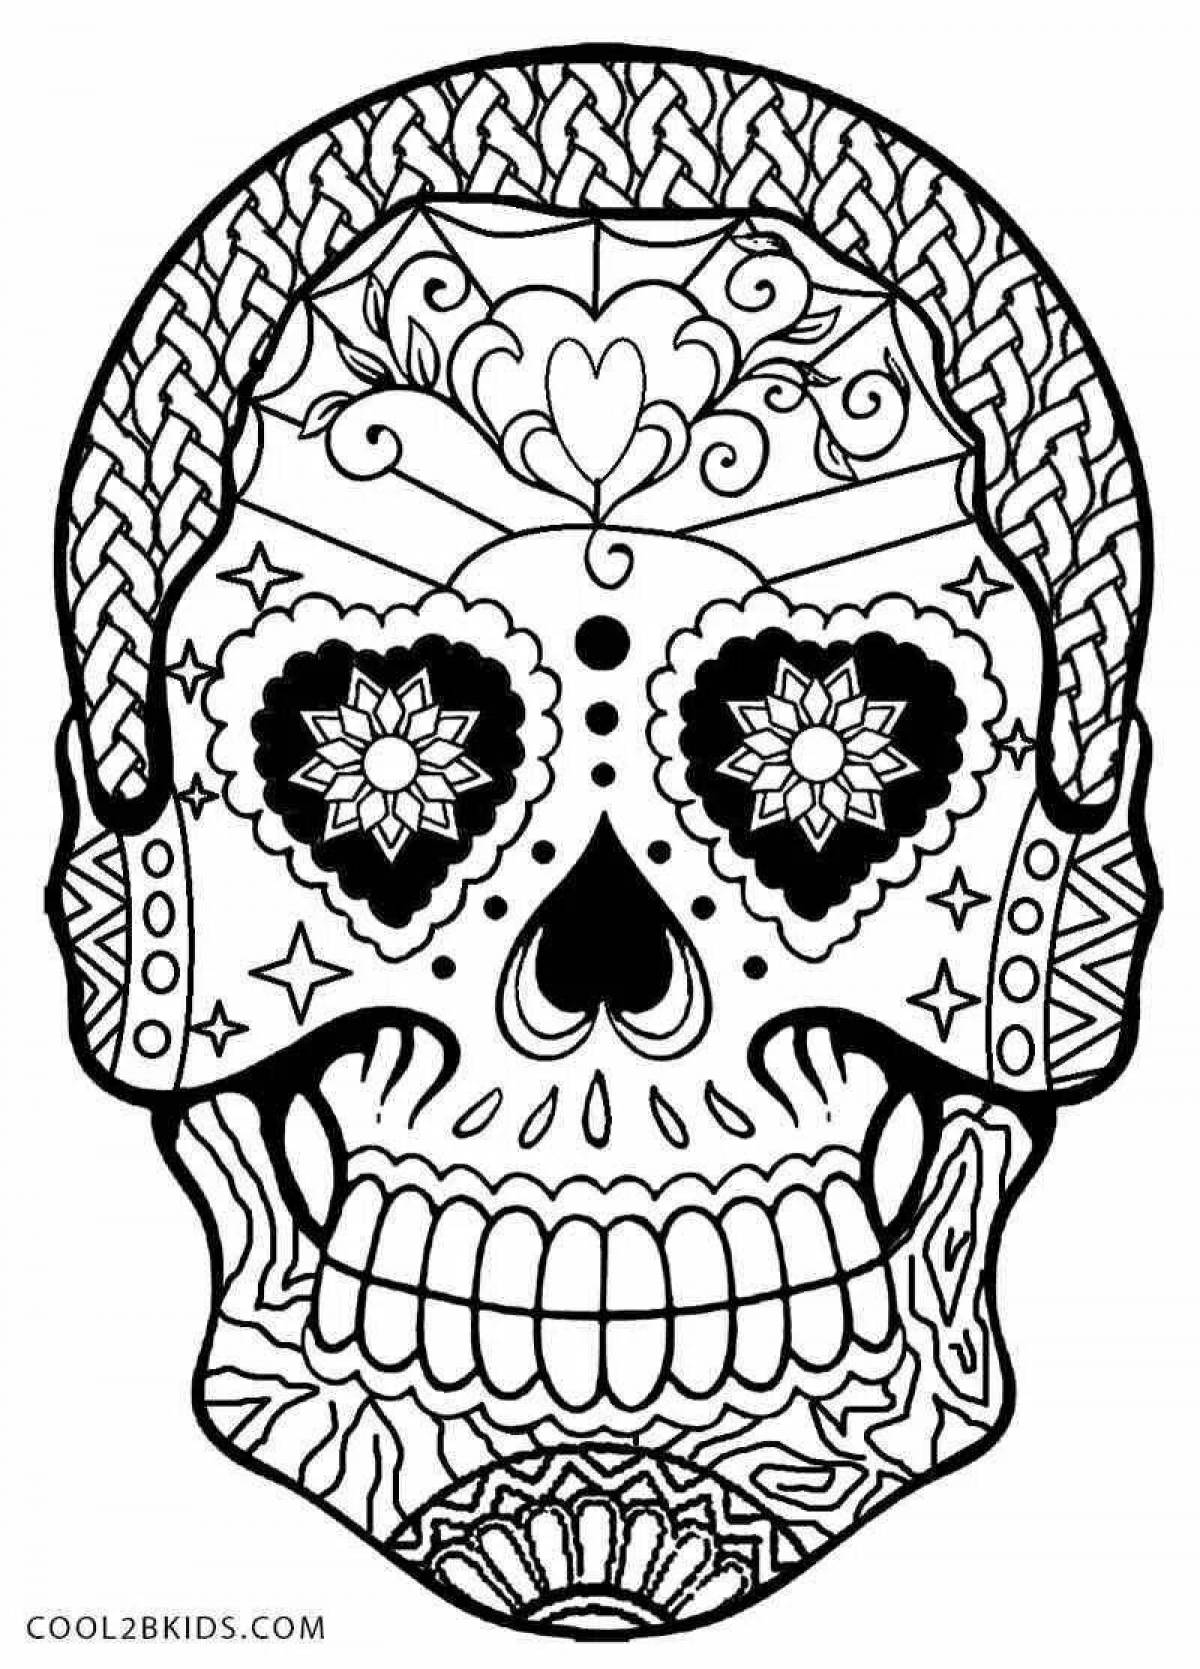 Holiday skull coloring book for kids